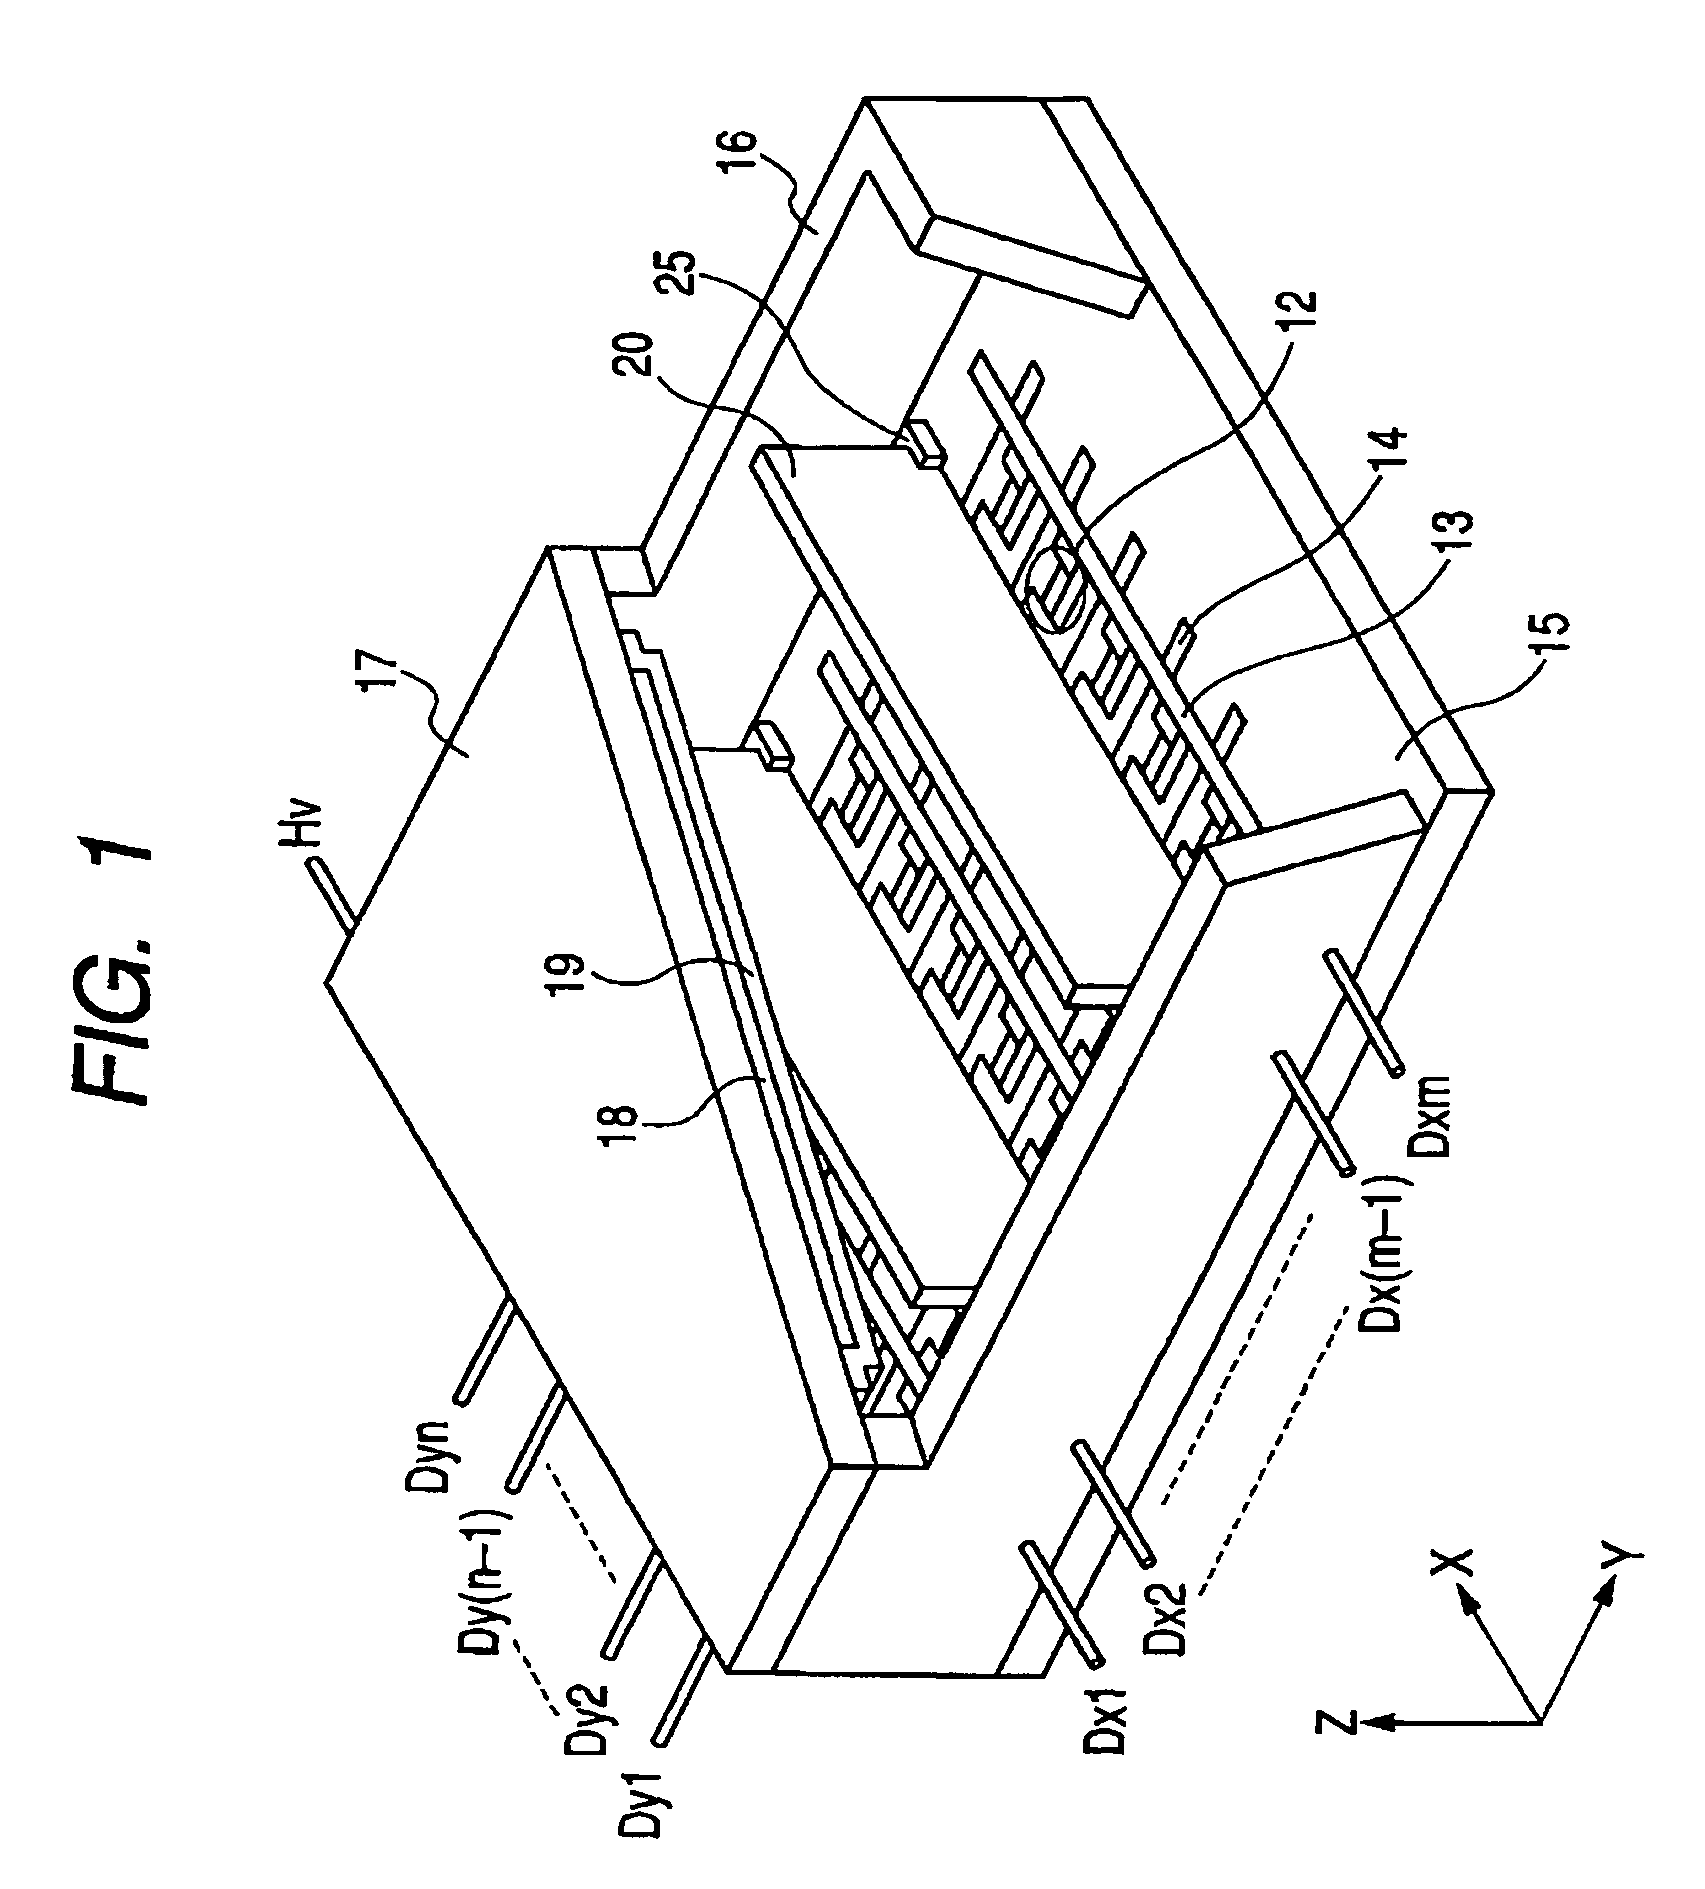 Spacer structure for image forming apparatus